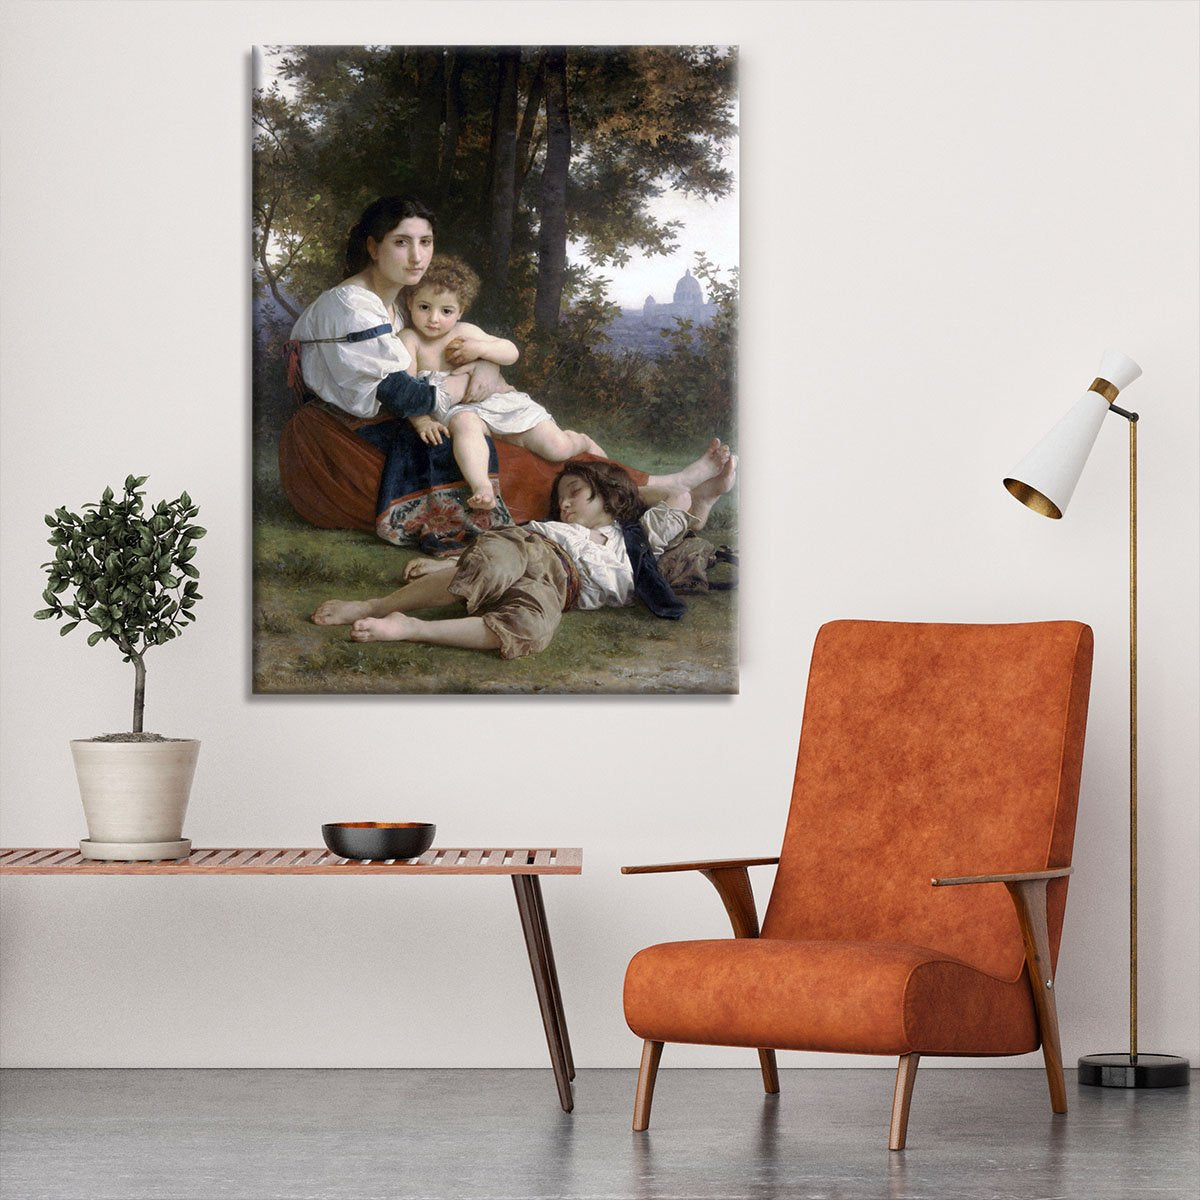 Rest By Bouguereau Canvas Print or Poster